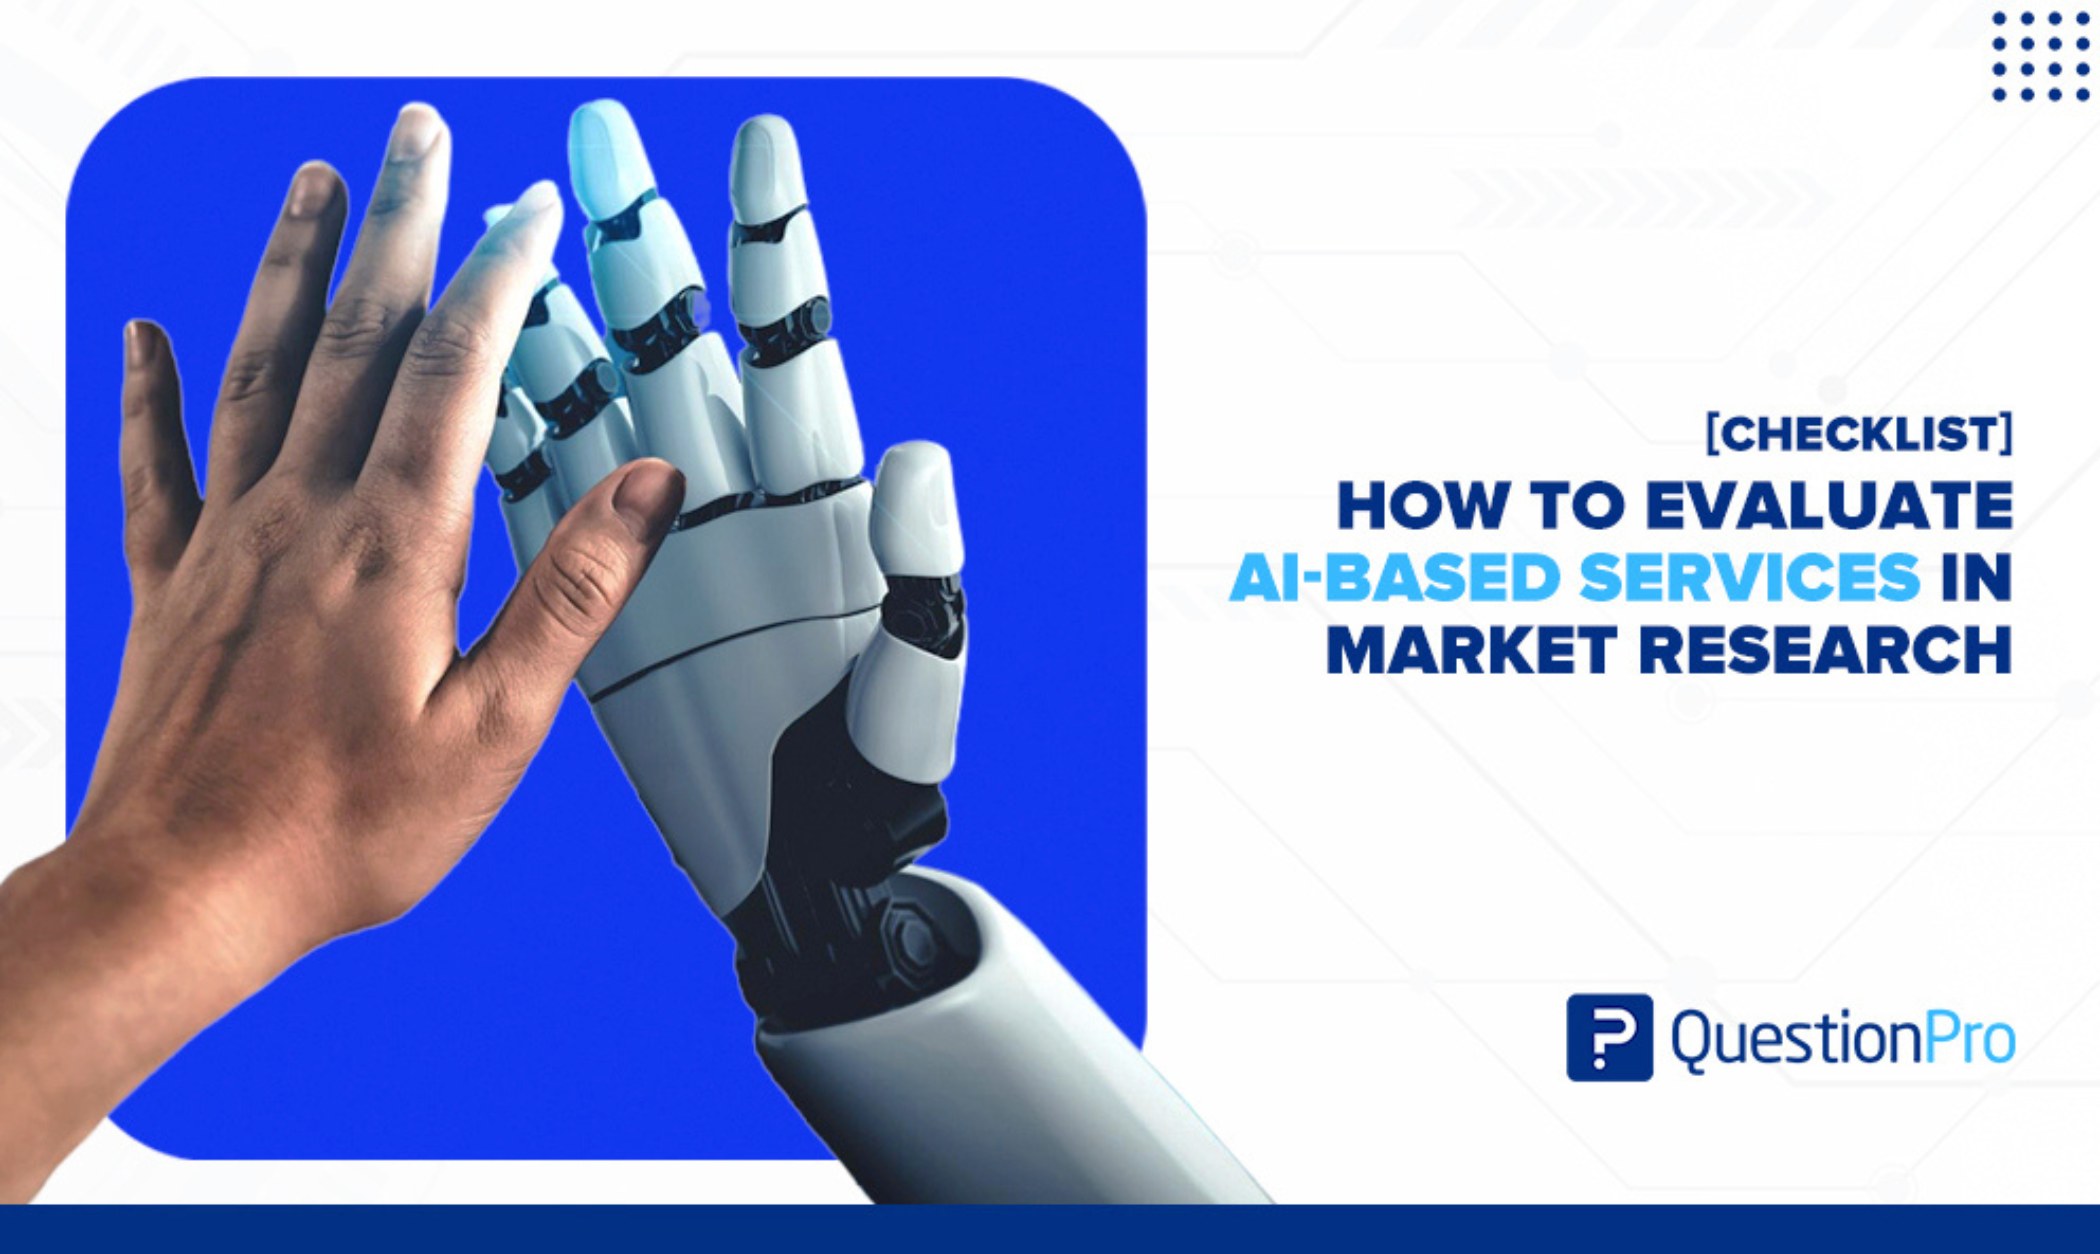 AI-Based Services Buying Guide for Market Research (based on ESOMAR’s 20 Questions) 